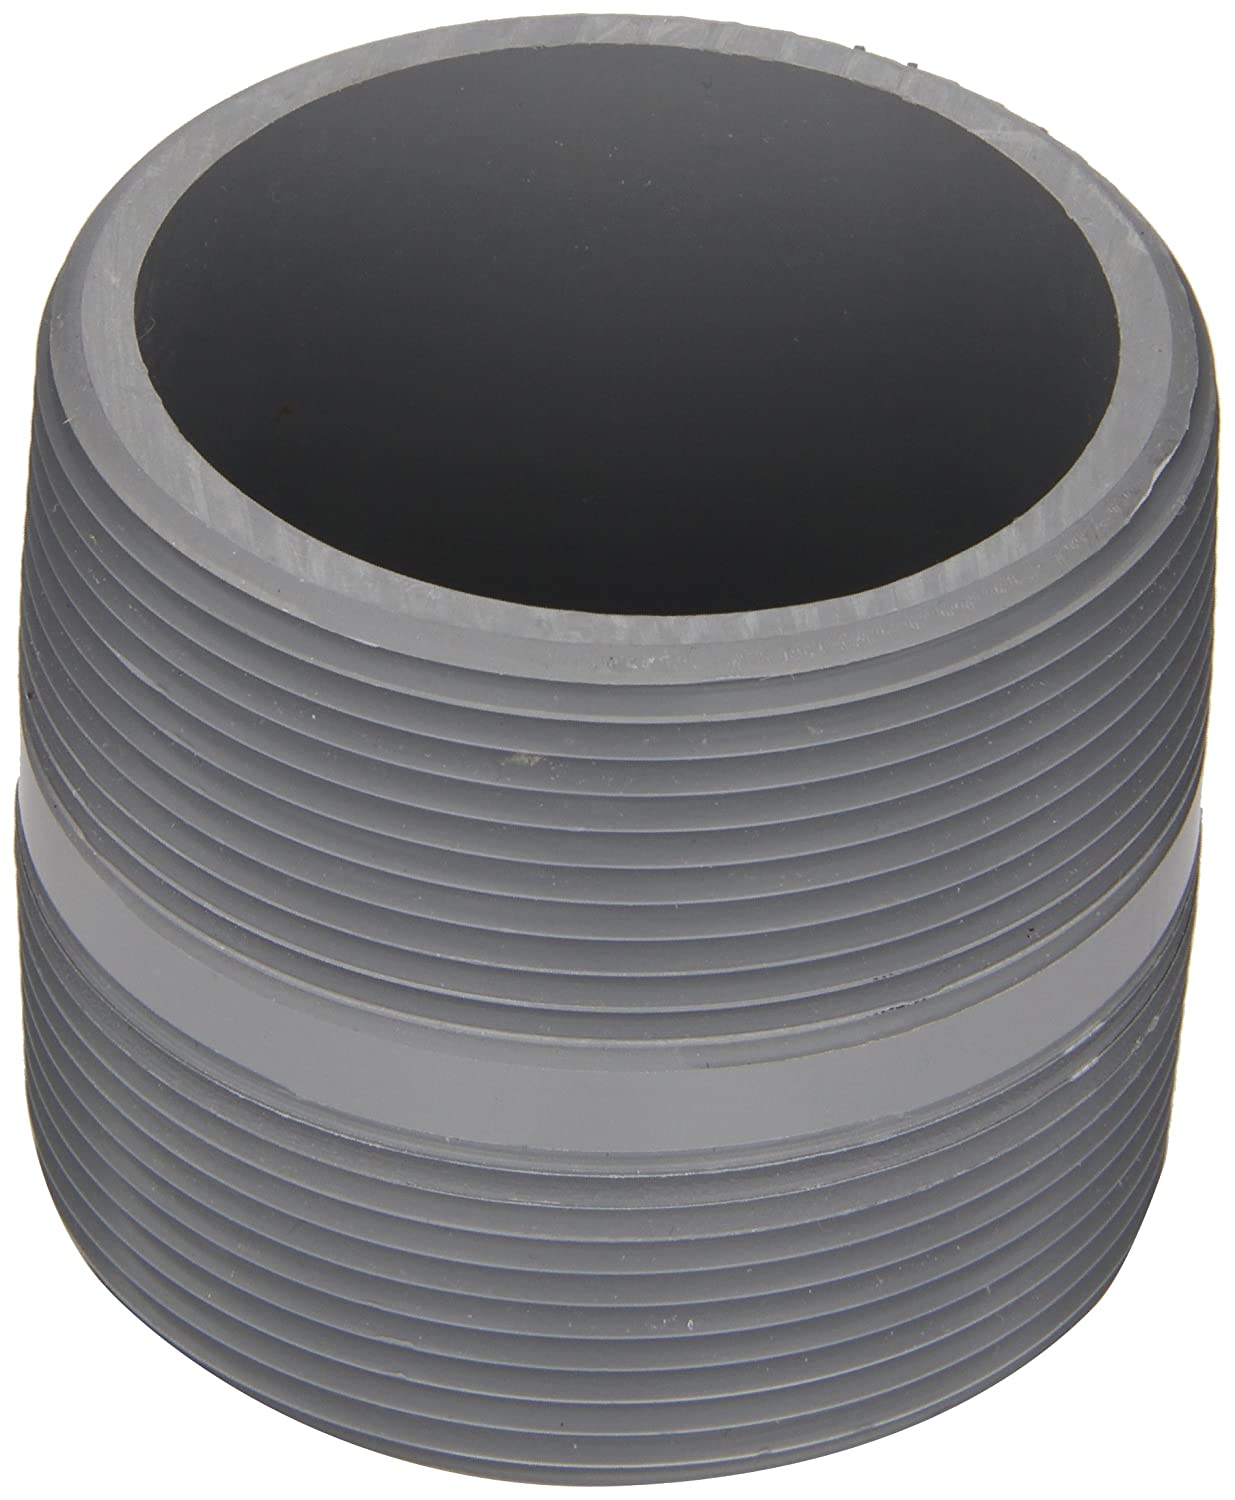 Spears 885-030C - CPVC Pipe Fitting, Nipple, Schedule 80, Gray, 1-1/4" NPT Male, 3" Length